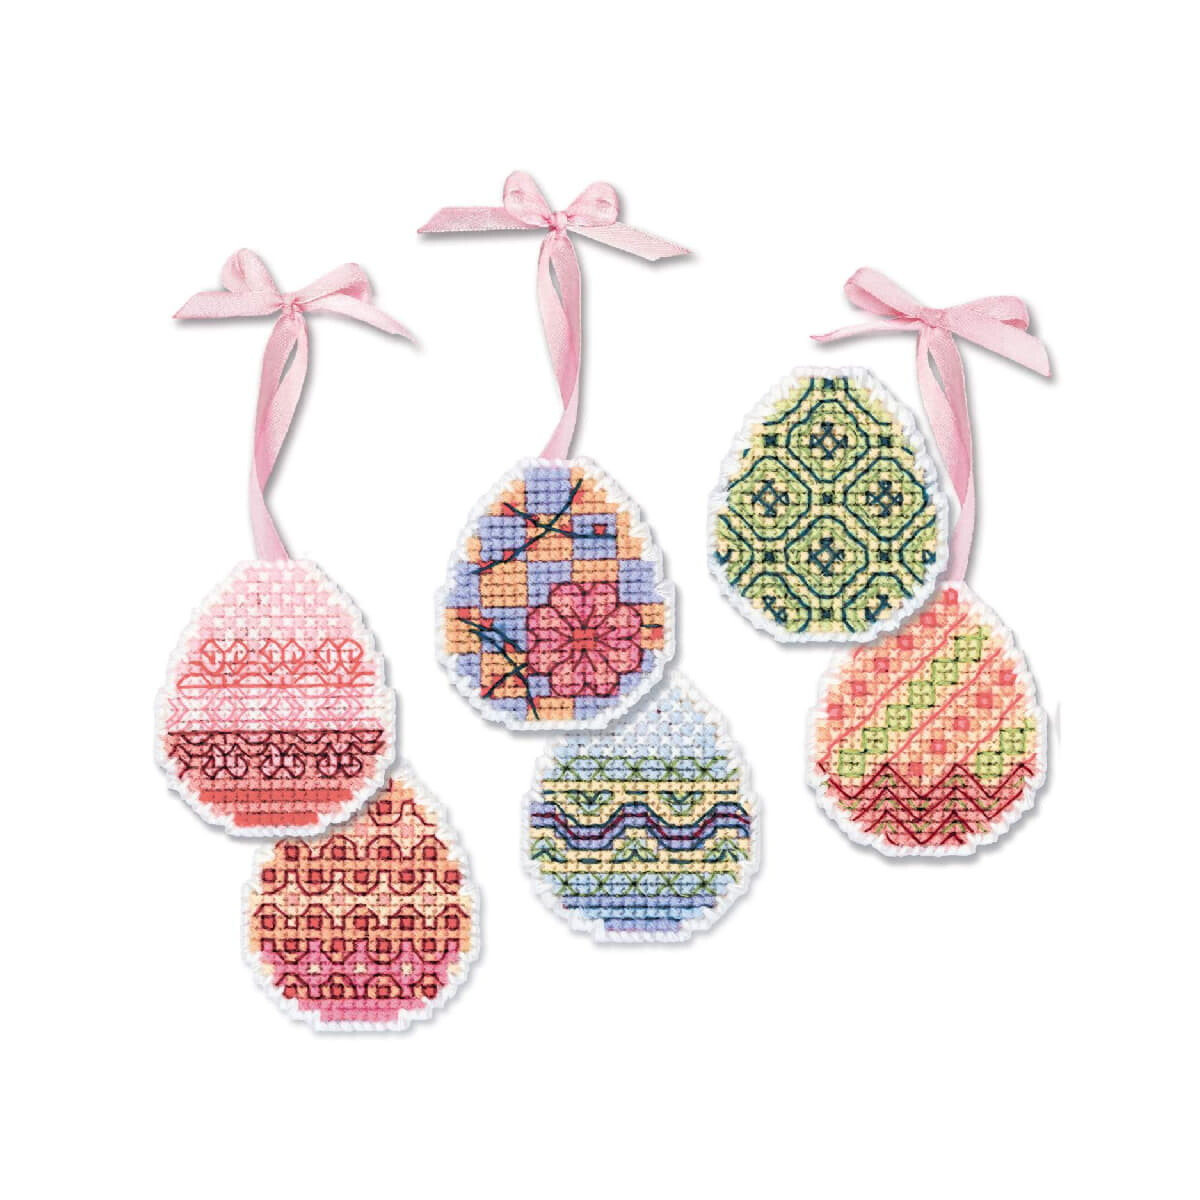 Riolis counted cross stitch kit "Easter Pattern Set...